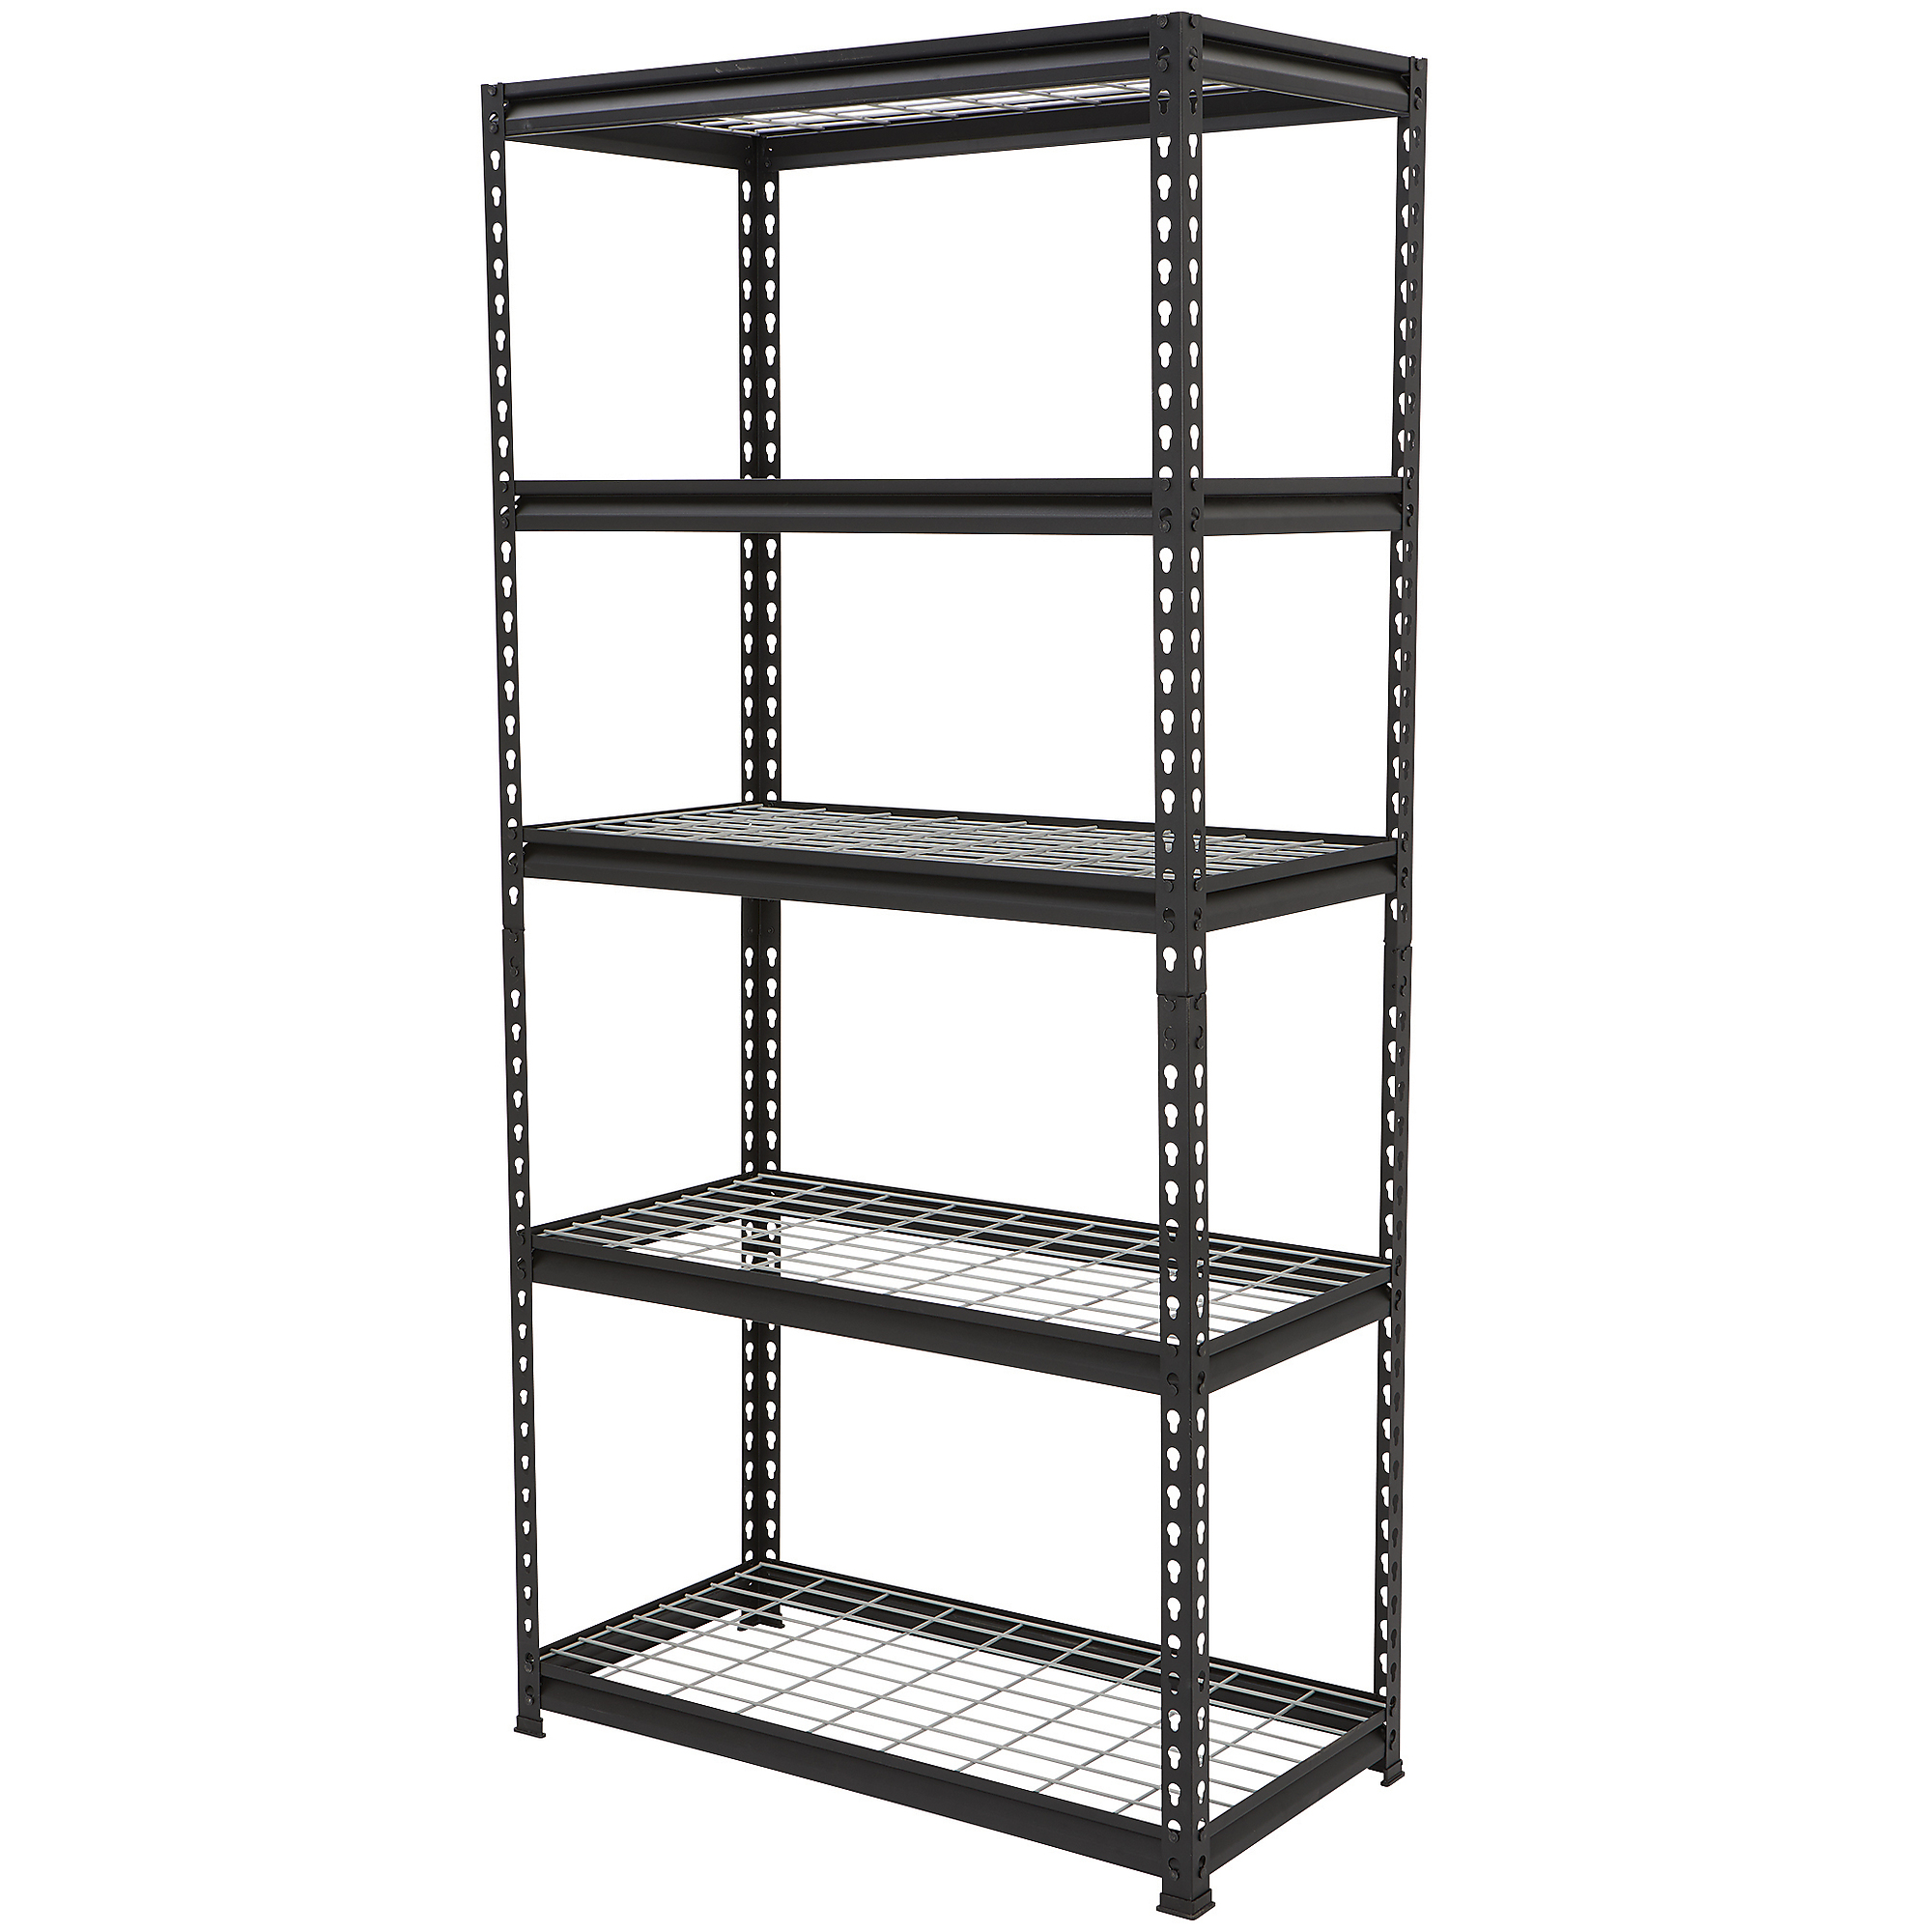 Strongway Heavy-Duty Wire Shelving Unit, 5 Shelves, 4000-Lb. Capacity, 36Inch W x 18Inch D x 72Inch H